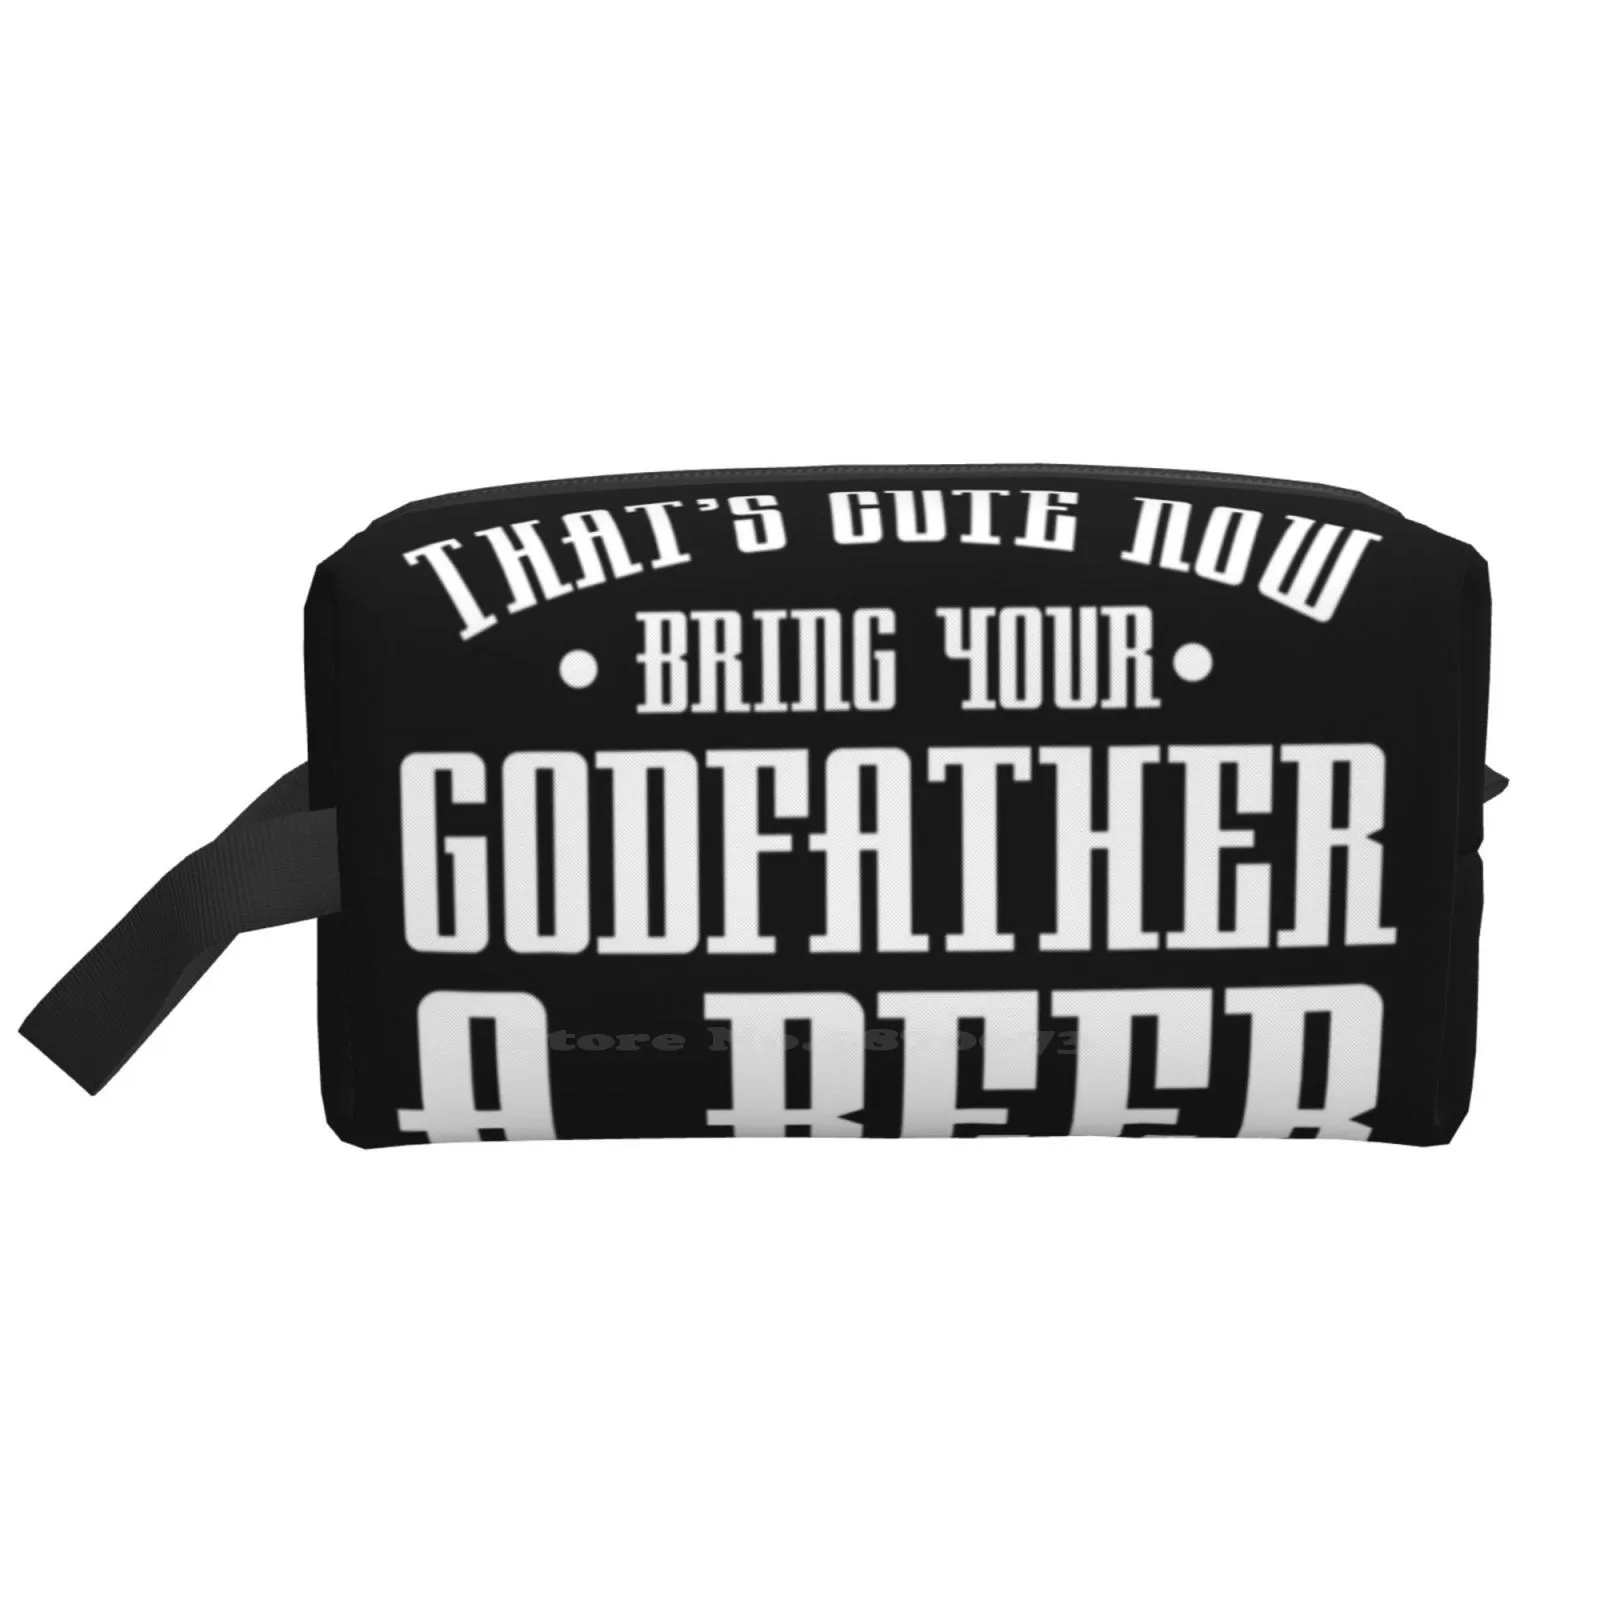 

Thats Cute Now Bring Your Godfather A Beer Drinking Design T-Shirt Cosmetic Bag Travel Storge Bags Large Size Ipa Ipa Beer